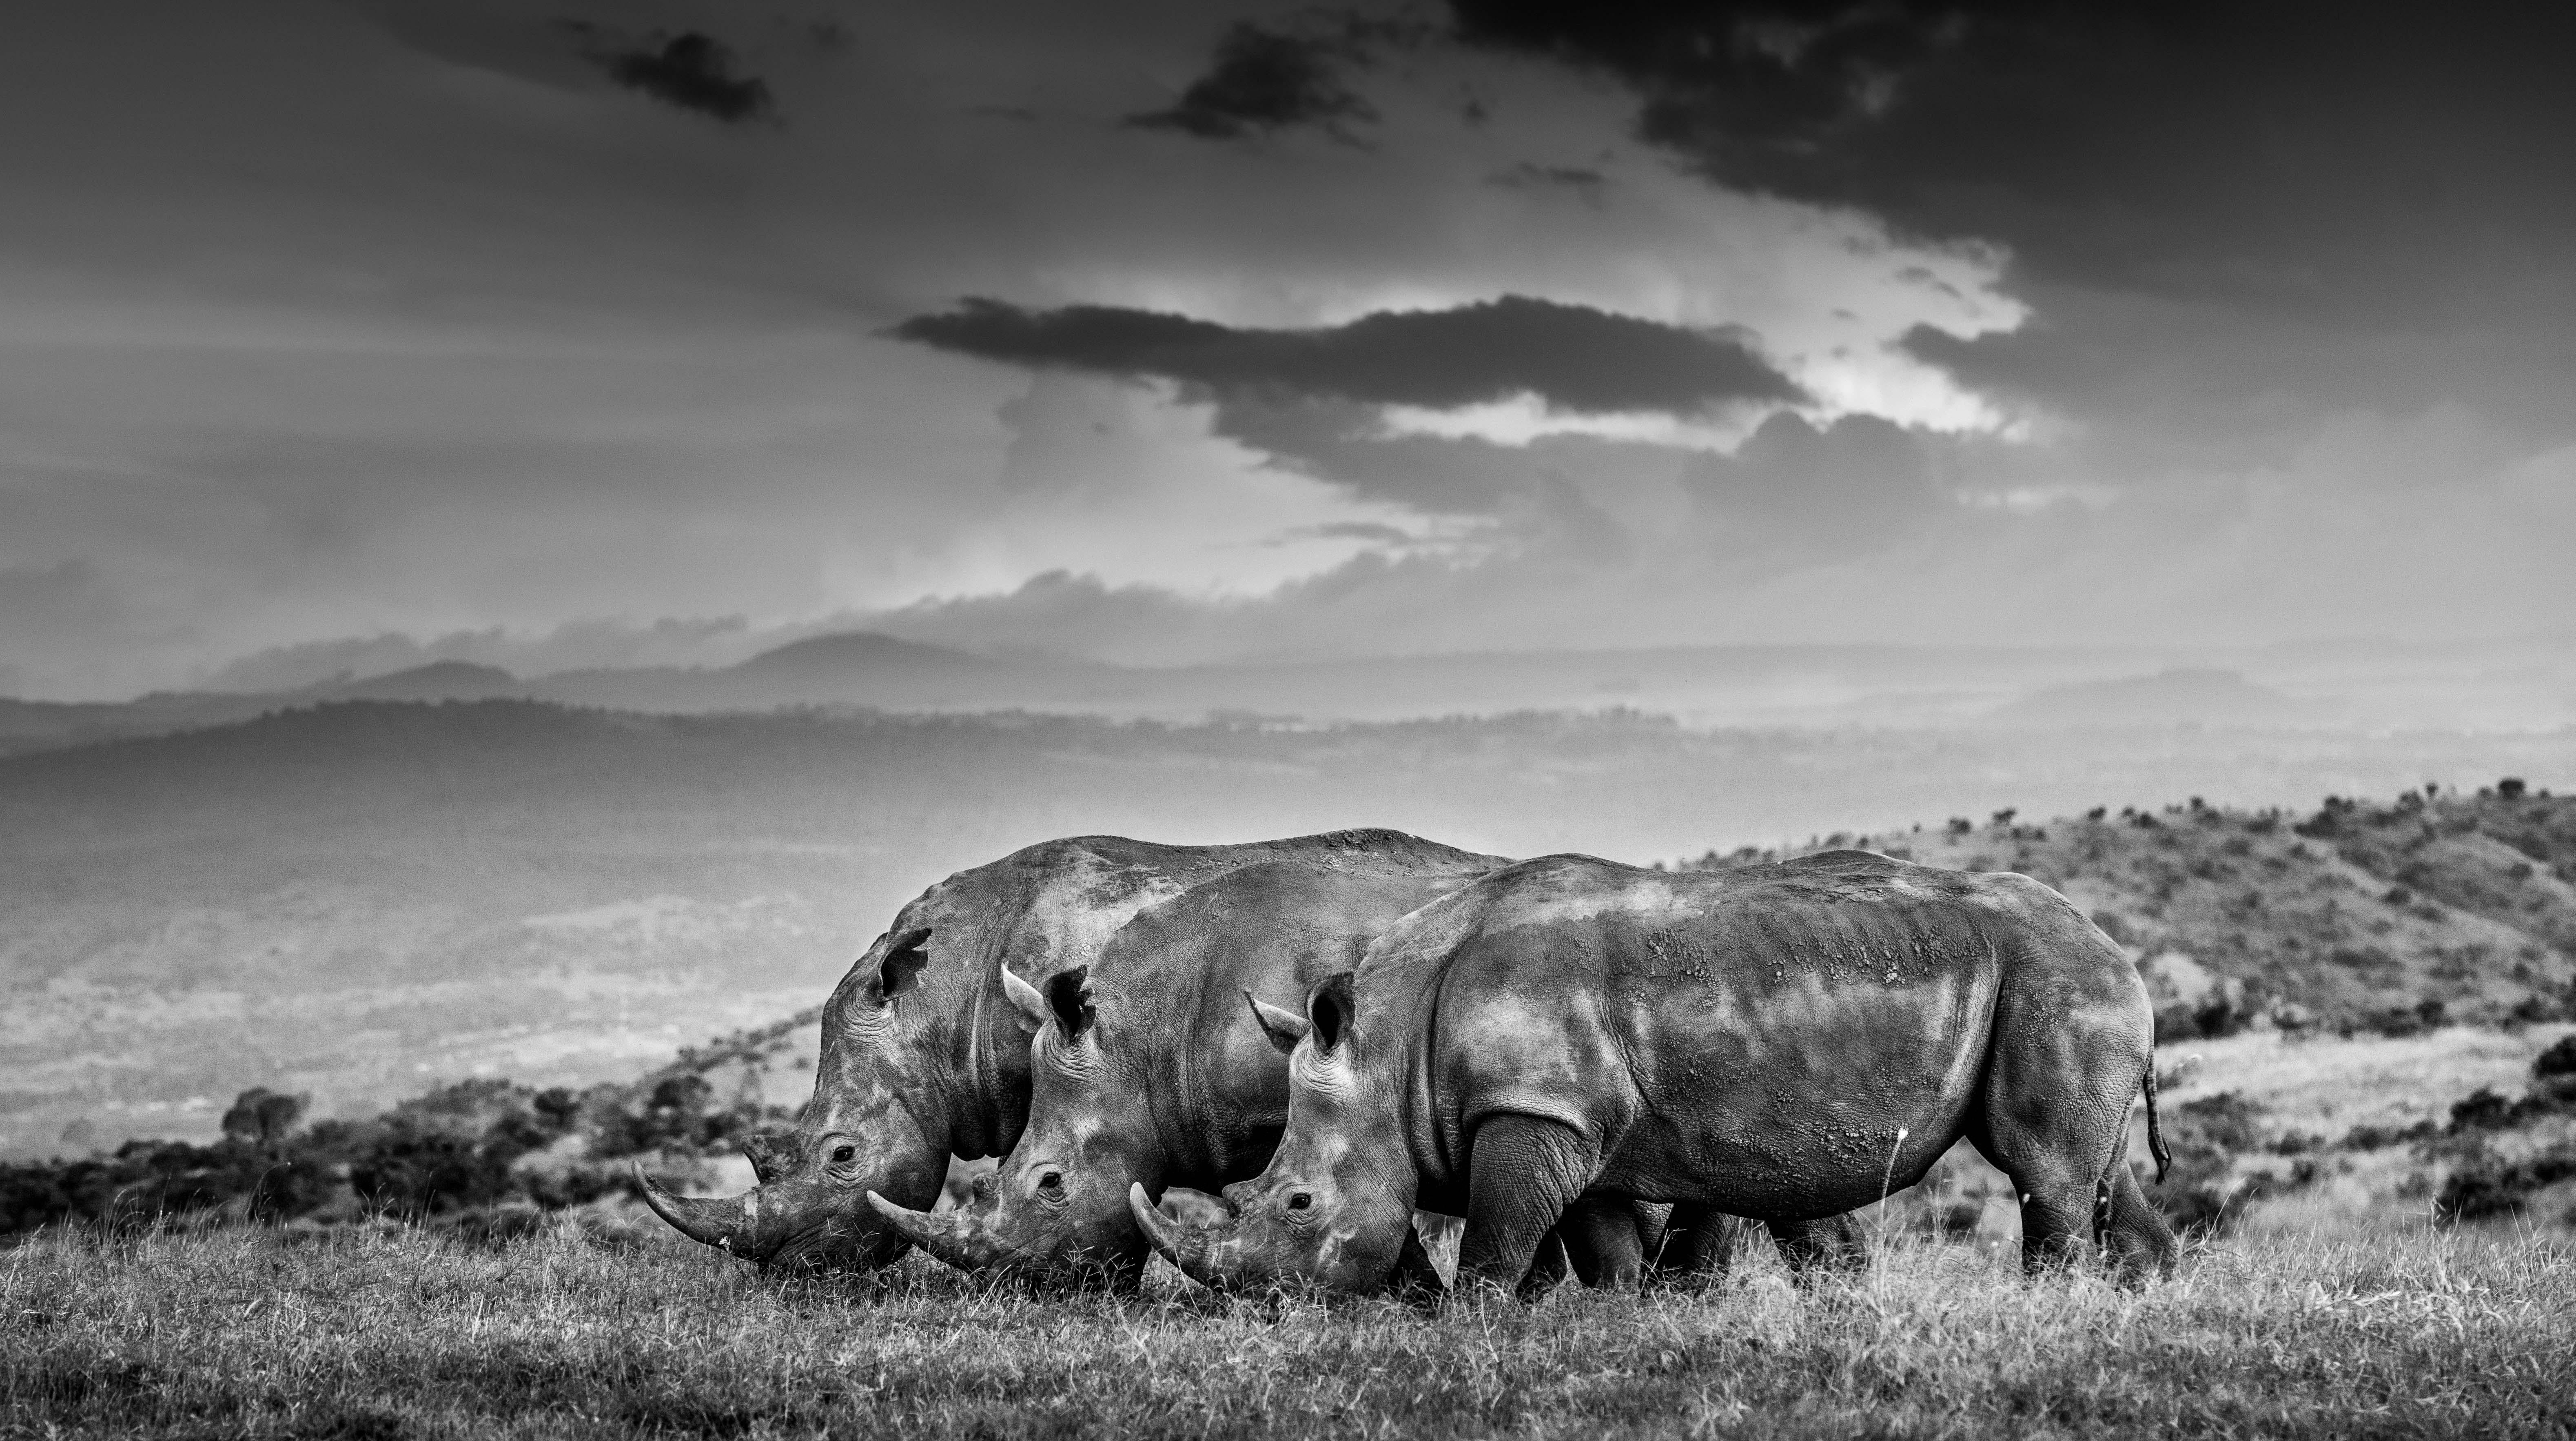 "The Lewa-Borana landscape has become a true success story in rhino conservation. The landscape is home to about 13% of Kenya’s rhinos making it a great place to photograph them. 

This landscape serves as an example of what conservation is capable